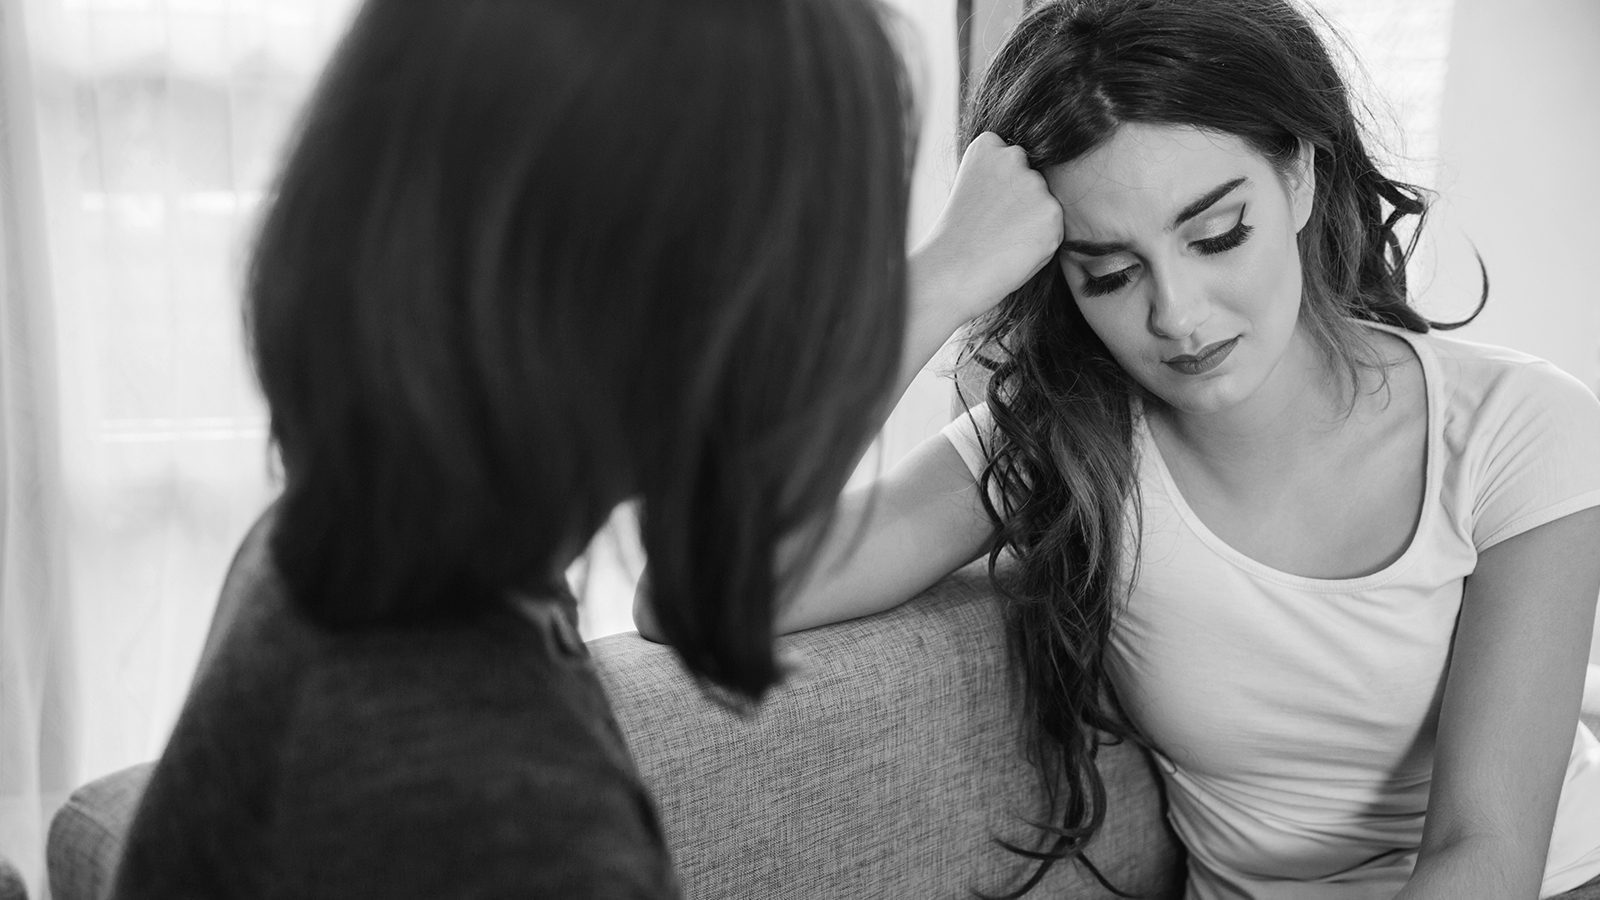 7 Things to Never Say to Someone With Anxiety Disorder (and What to Say Instead)